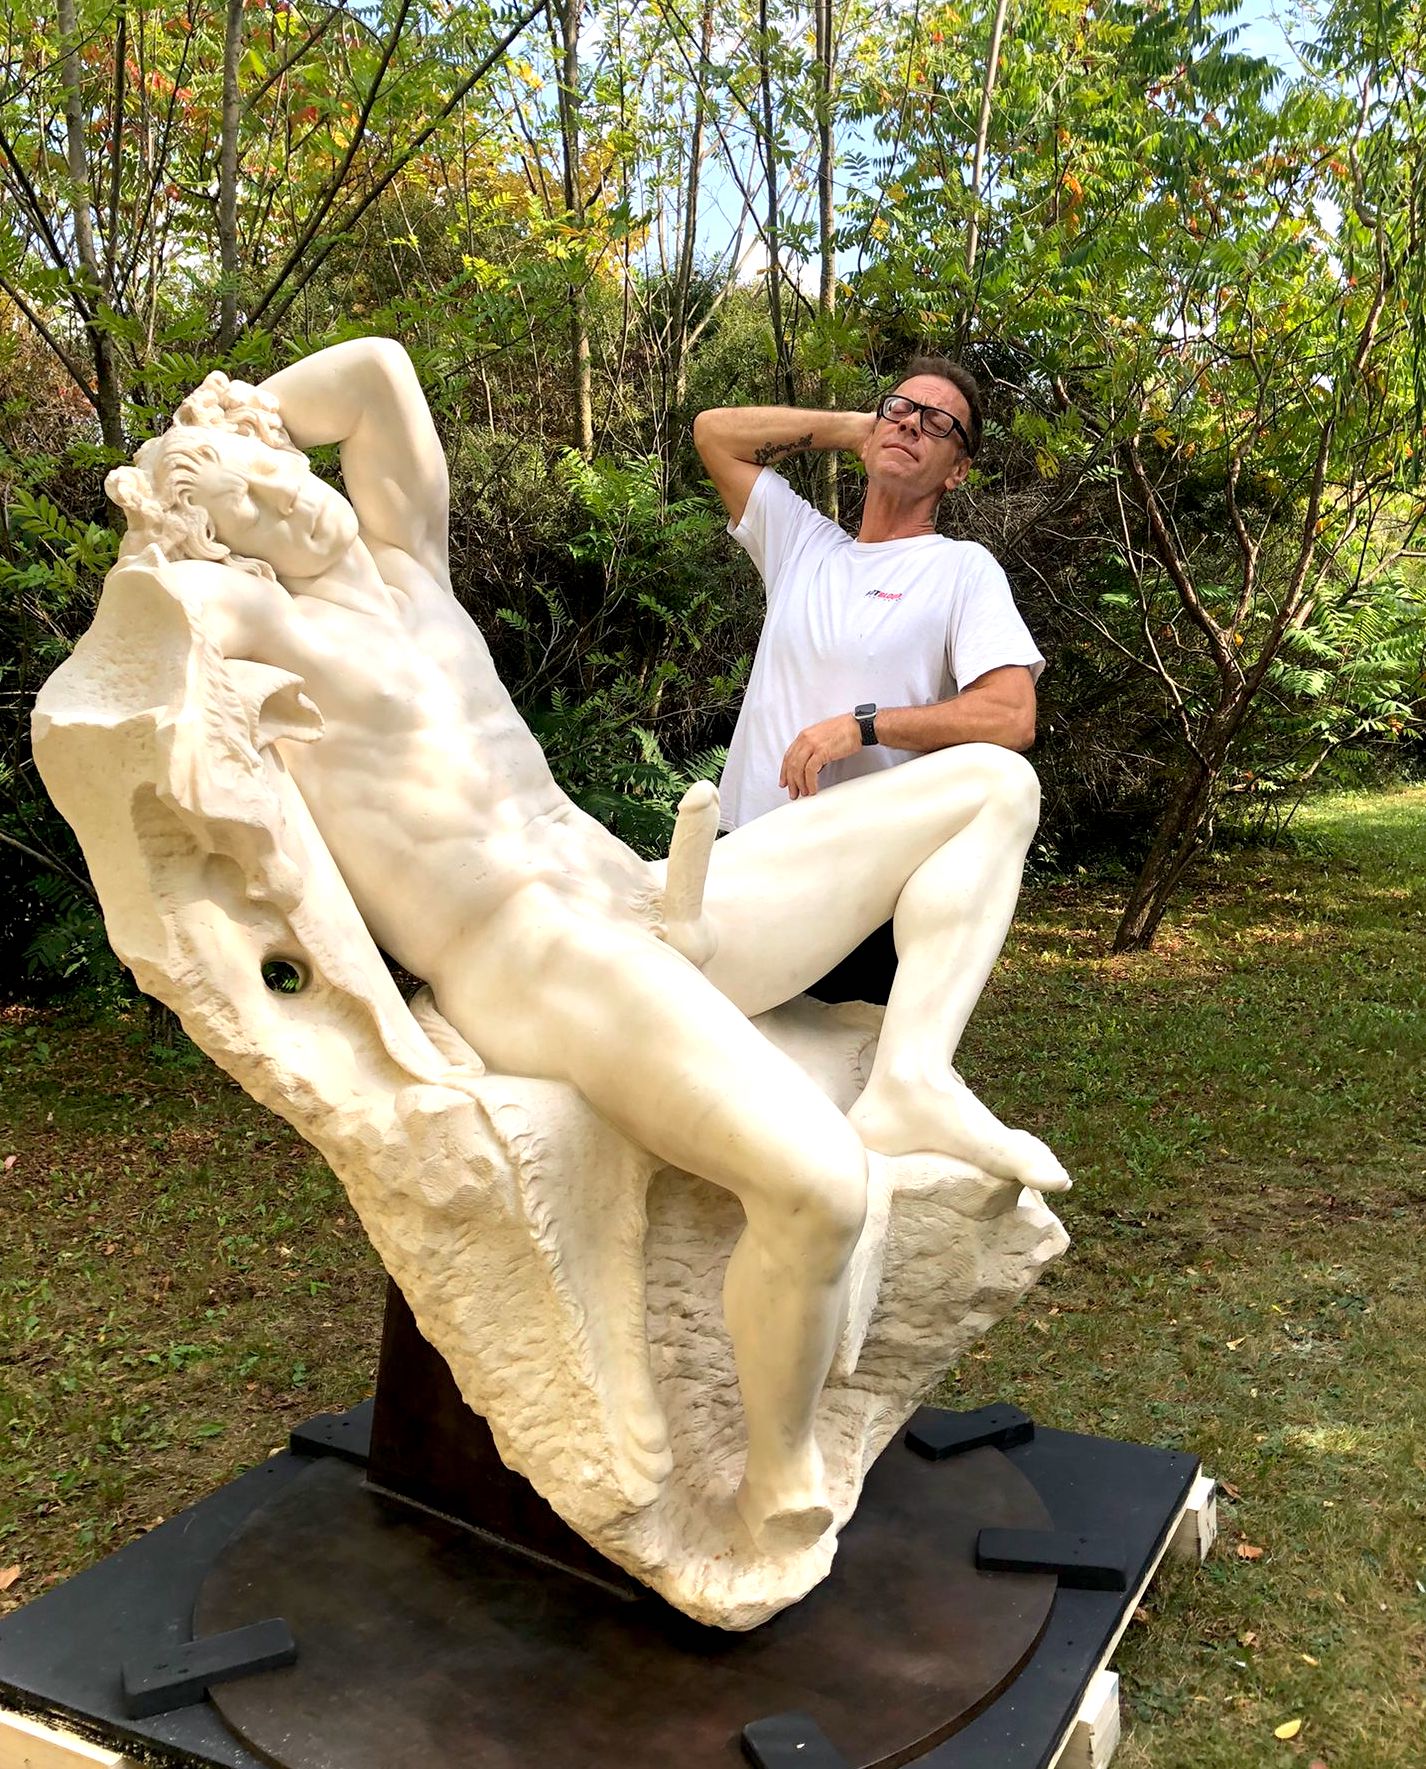 Statue Porn - A Look at the Rocco Siffredi Sculpture, Which Will 'Star' in his Next  Project. - bdsmcafe.com BDSM Stories